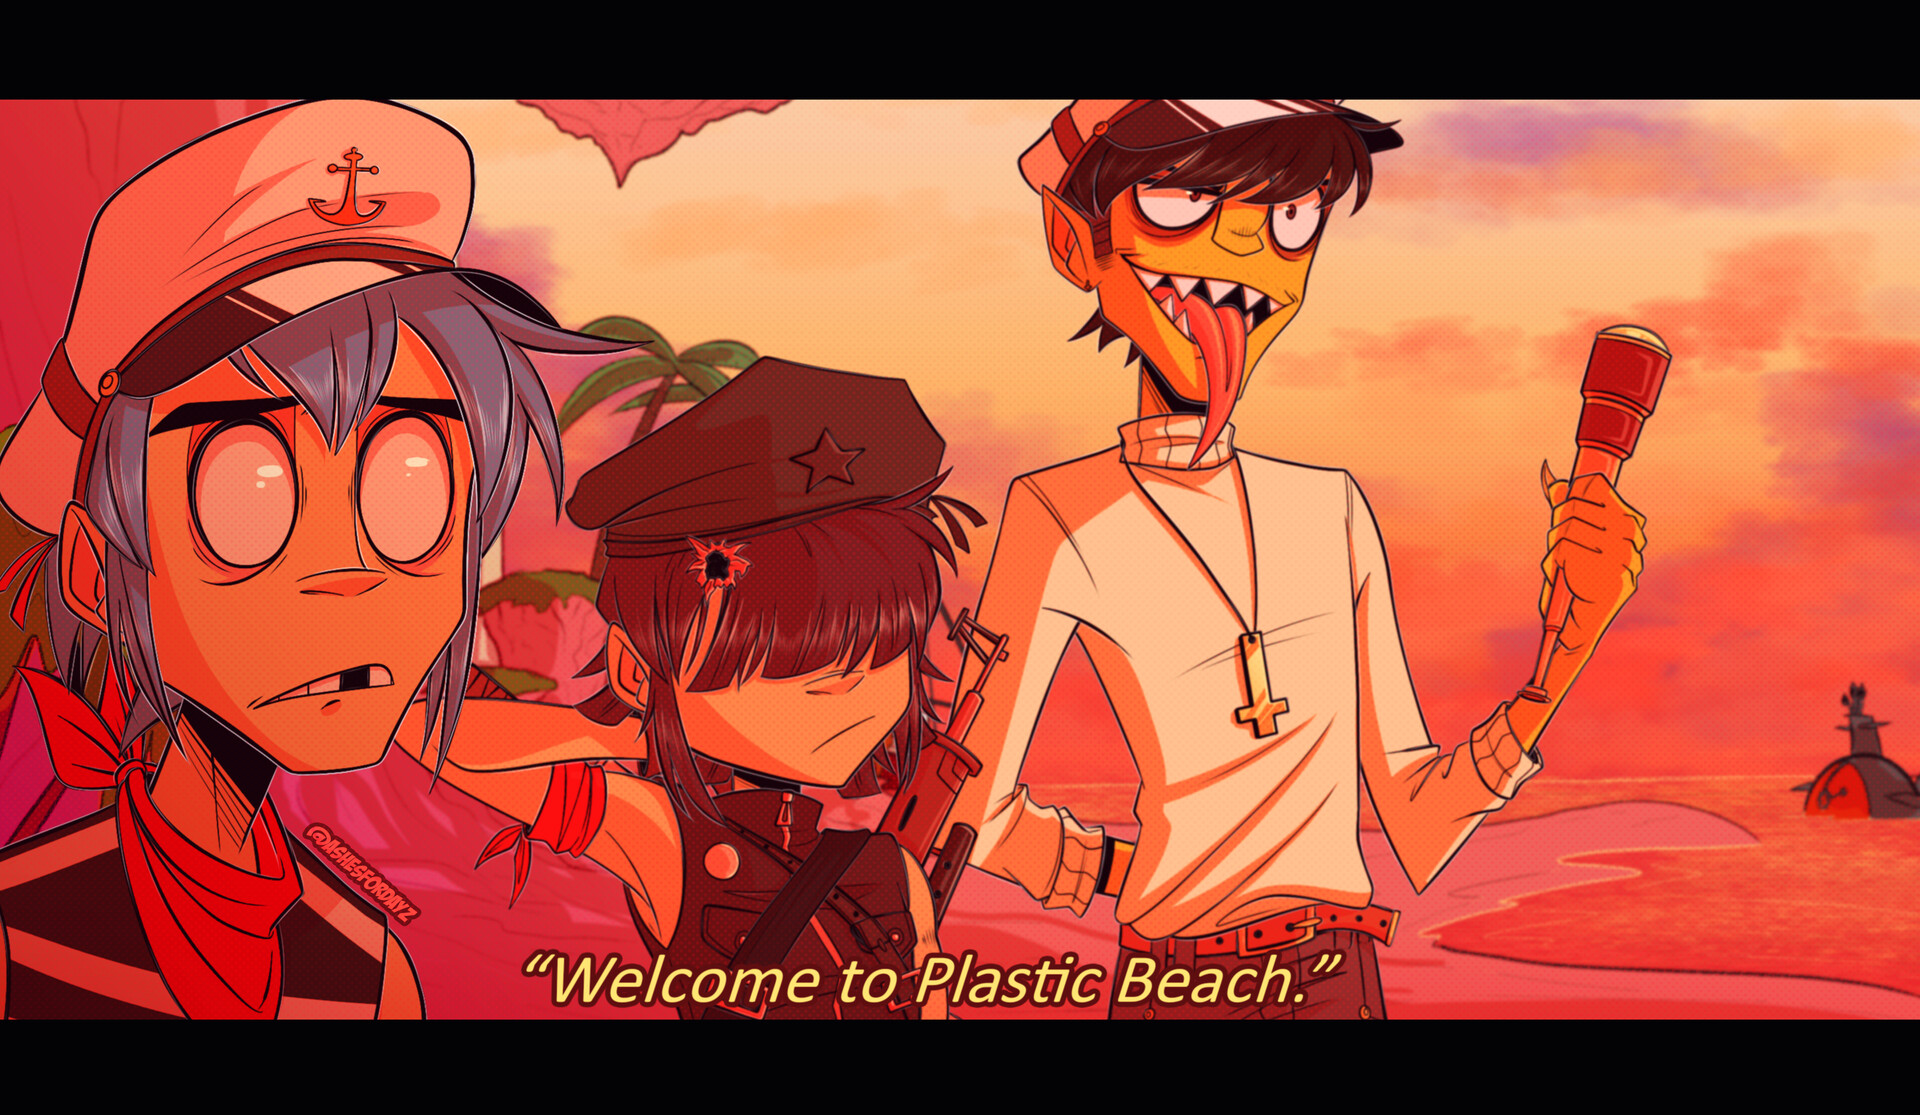 Welcome to the world of the Plastic Beach - Gorillaz.